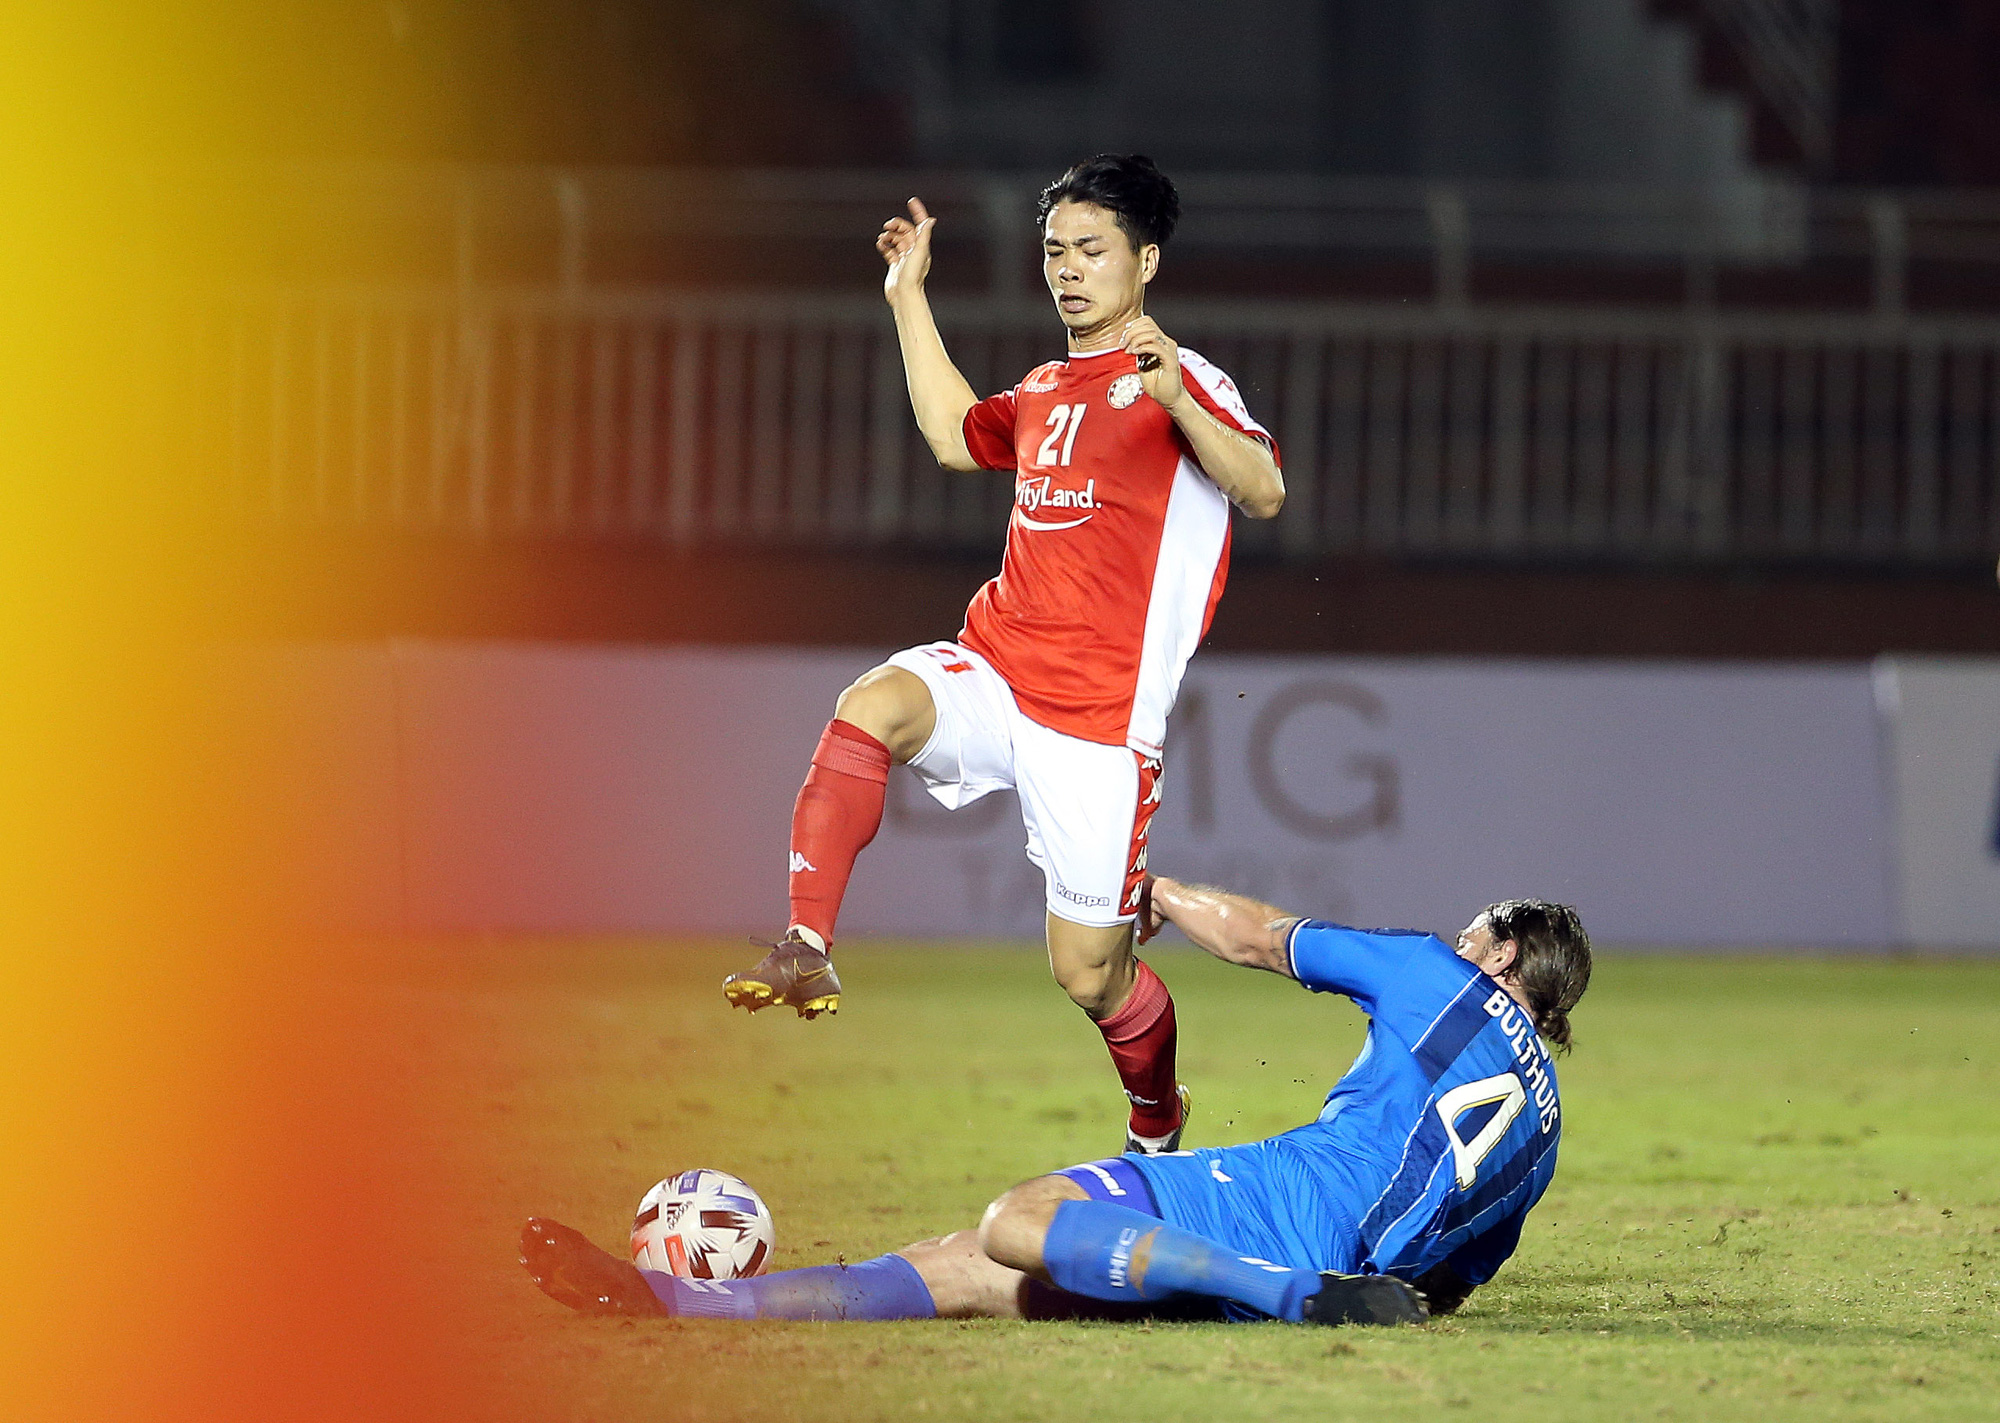 Star striker Nguyen Cong Phuong (21) vies for possession during a friendly match between Ho Chi Minh City FC and Ulsan Hyundai FC in Ho Chi Minh City on January 17, 2020. Photo: N.K. / Tuoi Tre